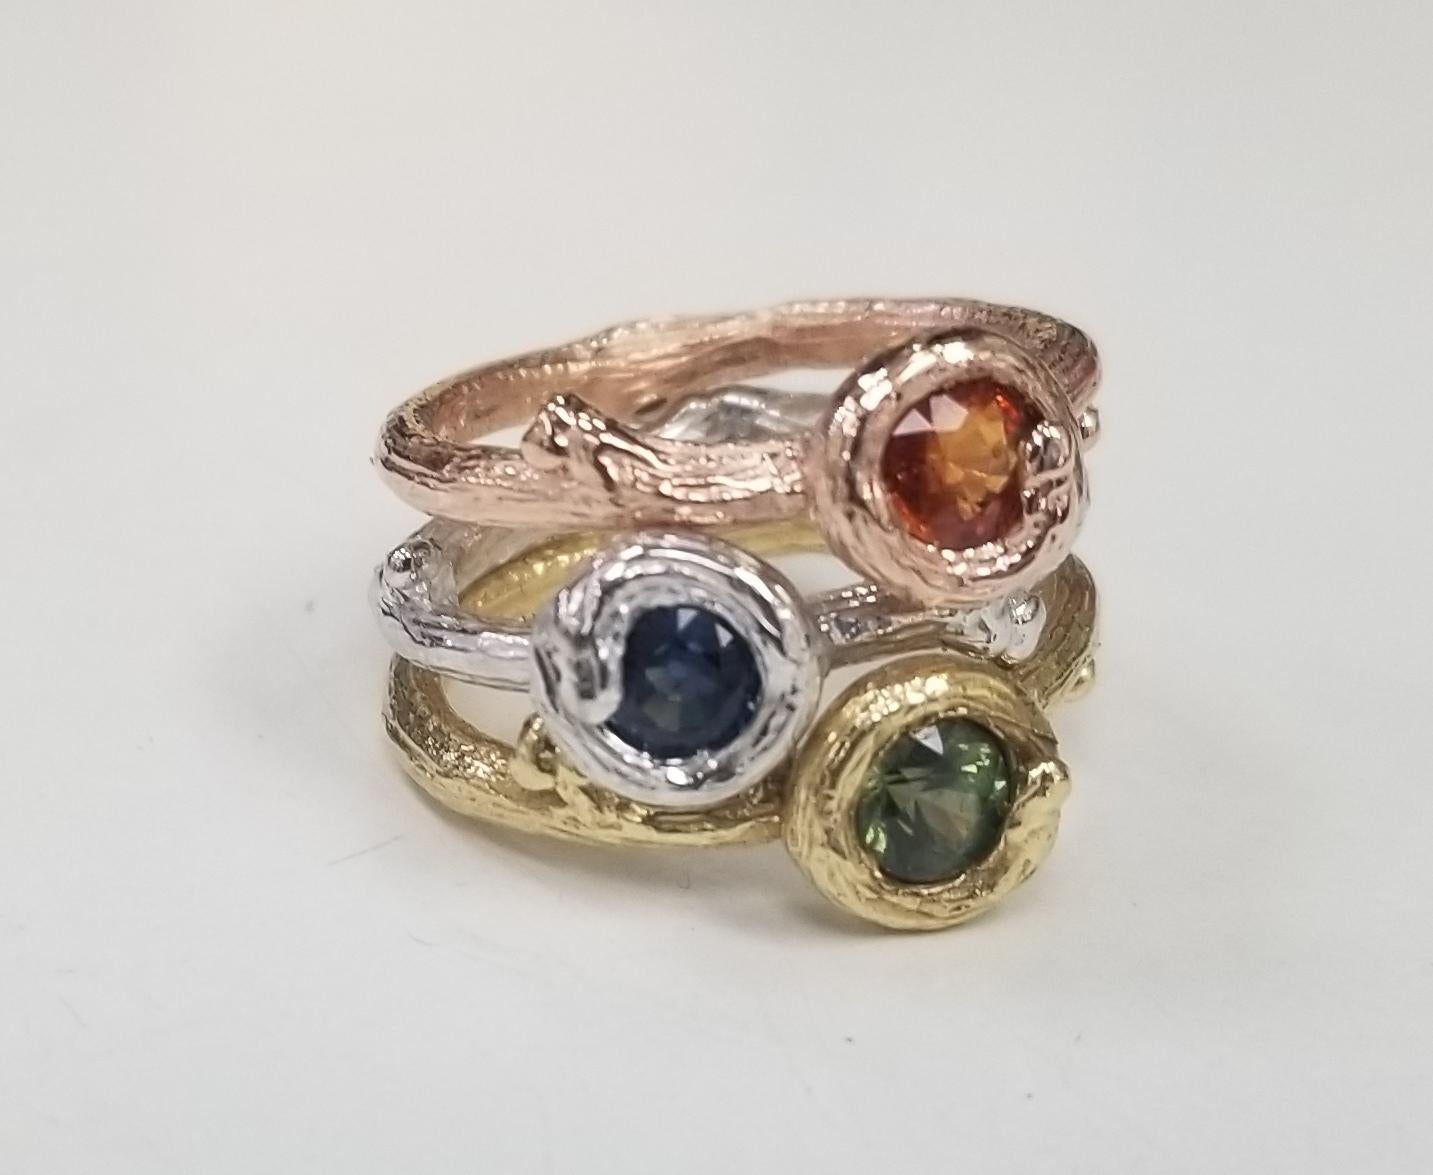 14k white, rose or yellow gold Gresha signature bark ring with 5mm Green, Blue and  Orange sapphire weighing .50pts. each. 

*Available in 14k yellow, white or rose with green, yellow, orange, and pink sapphire. pick your combinations.*

*Rings are